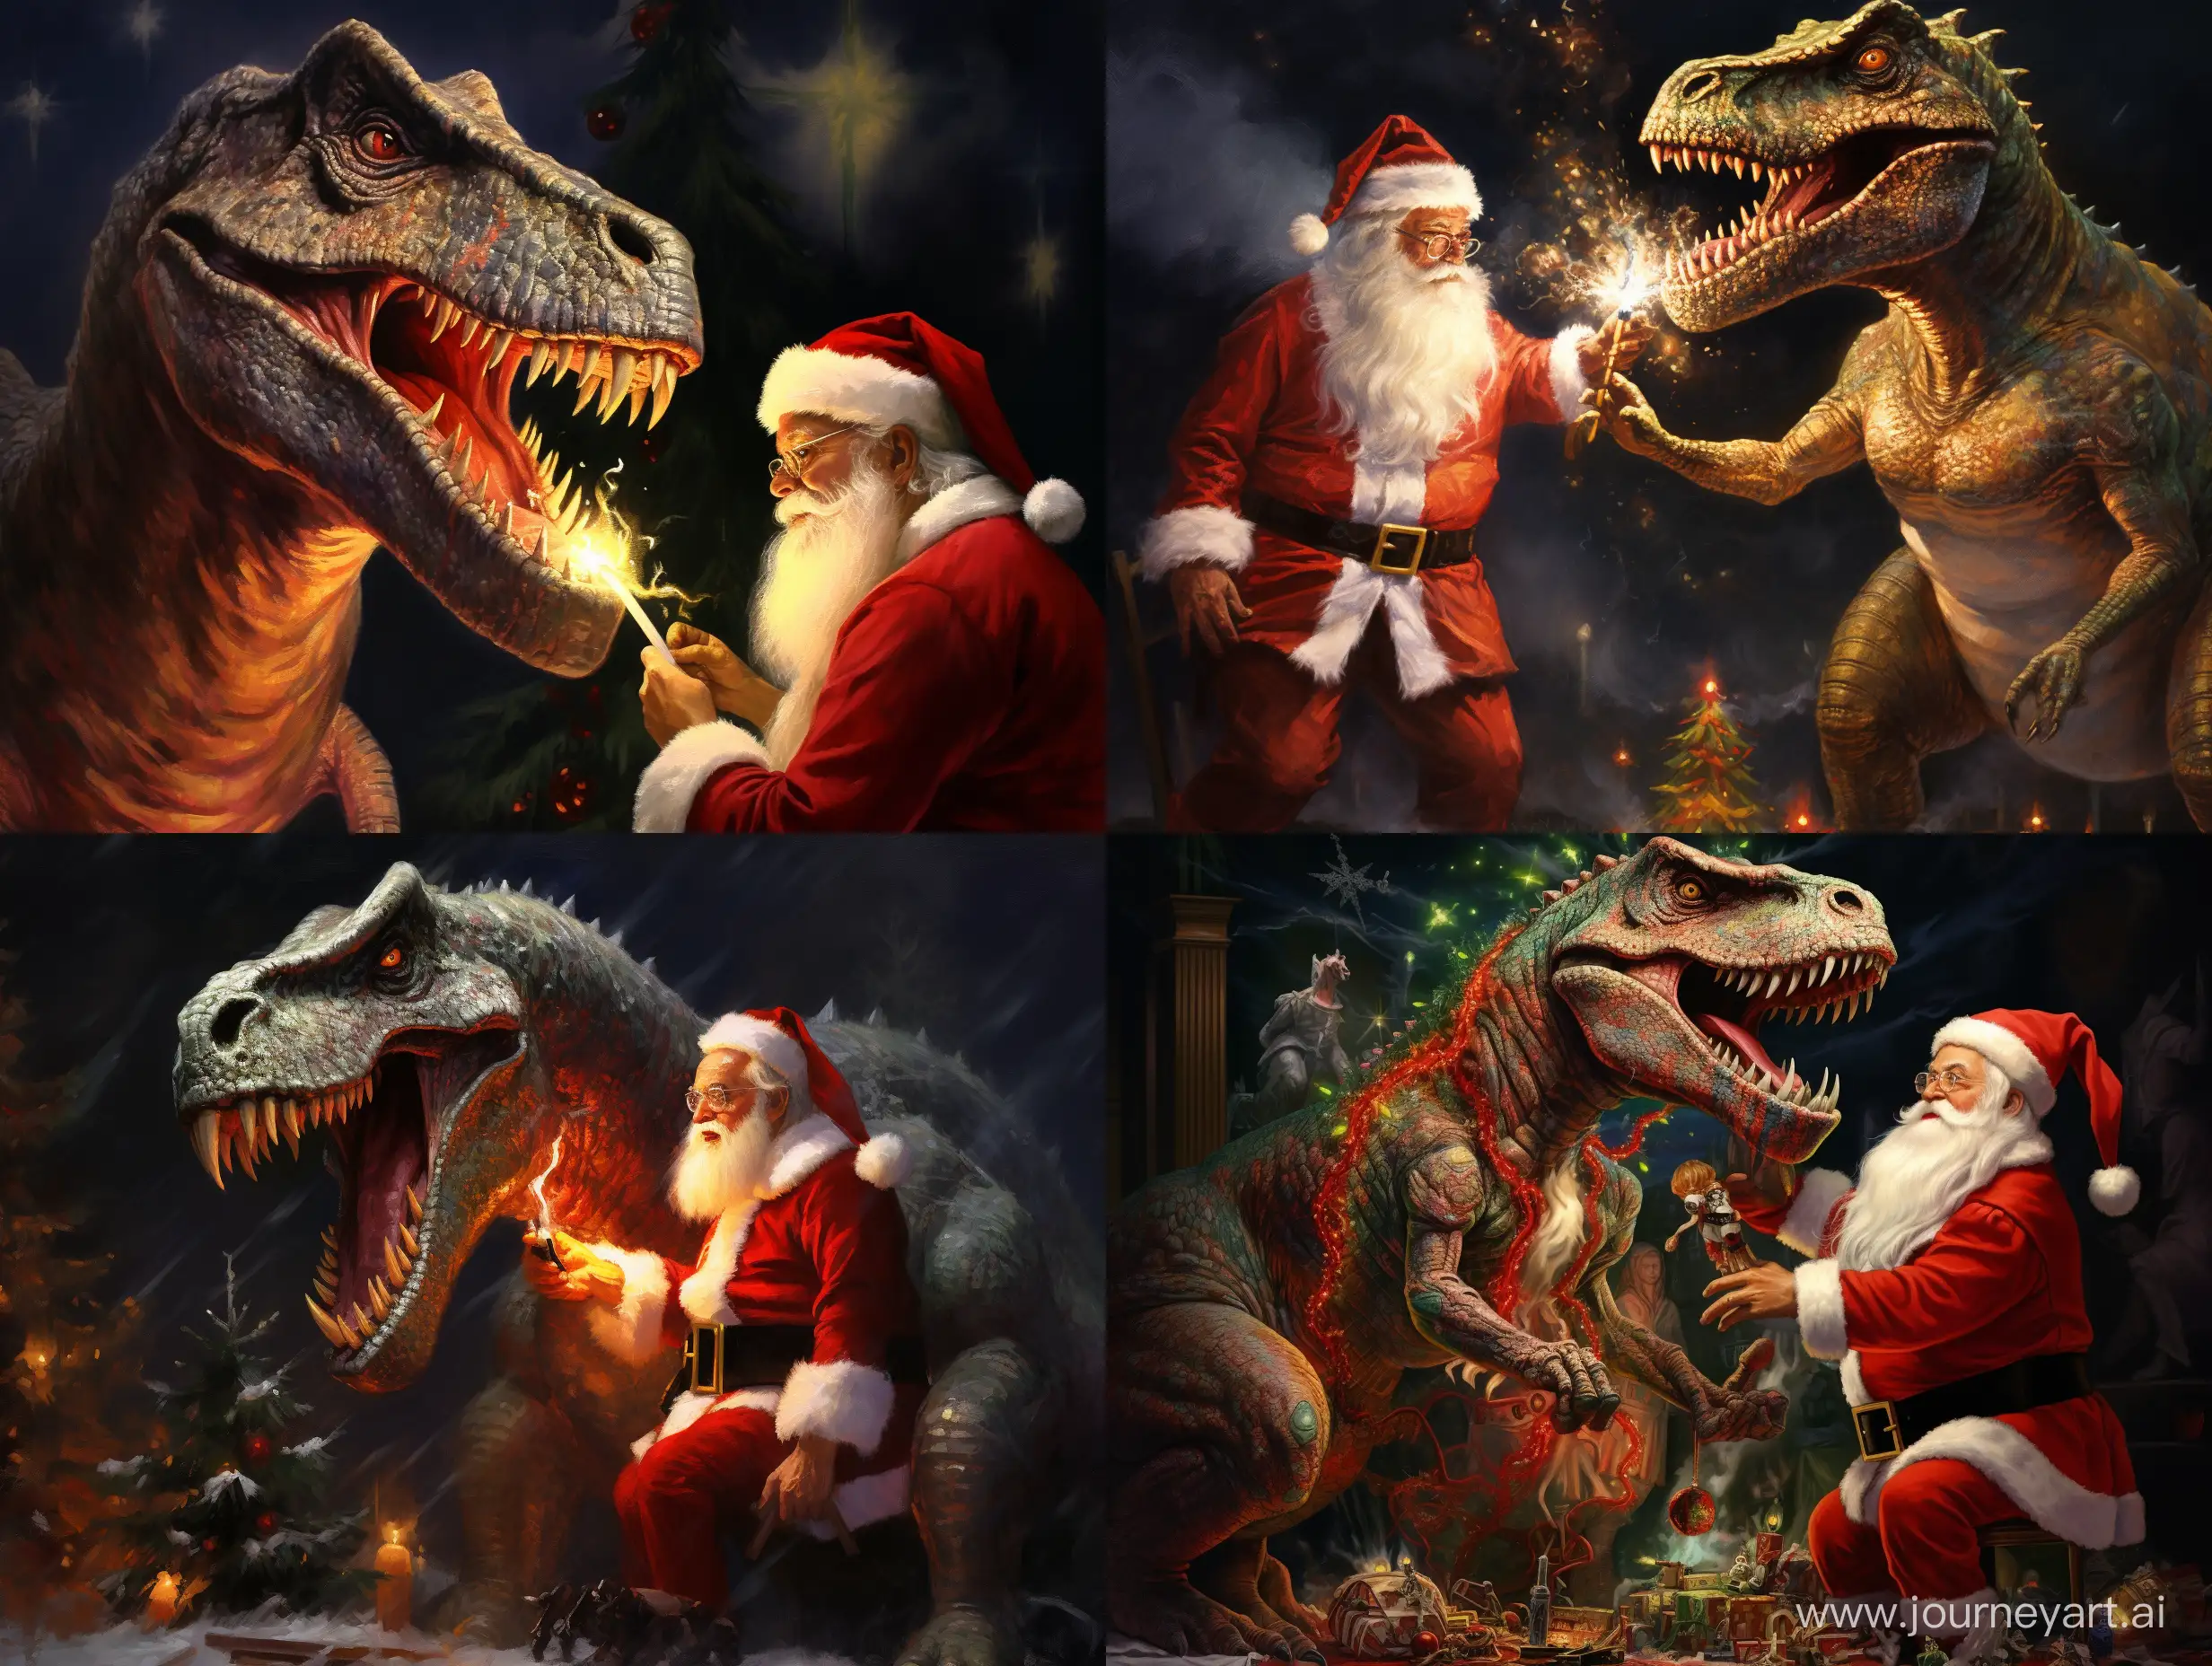 Robot-Tyrannosaurus, climbs Santa Claus in the fire for a Christmas tree, painted